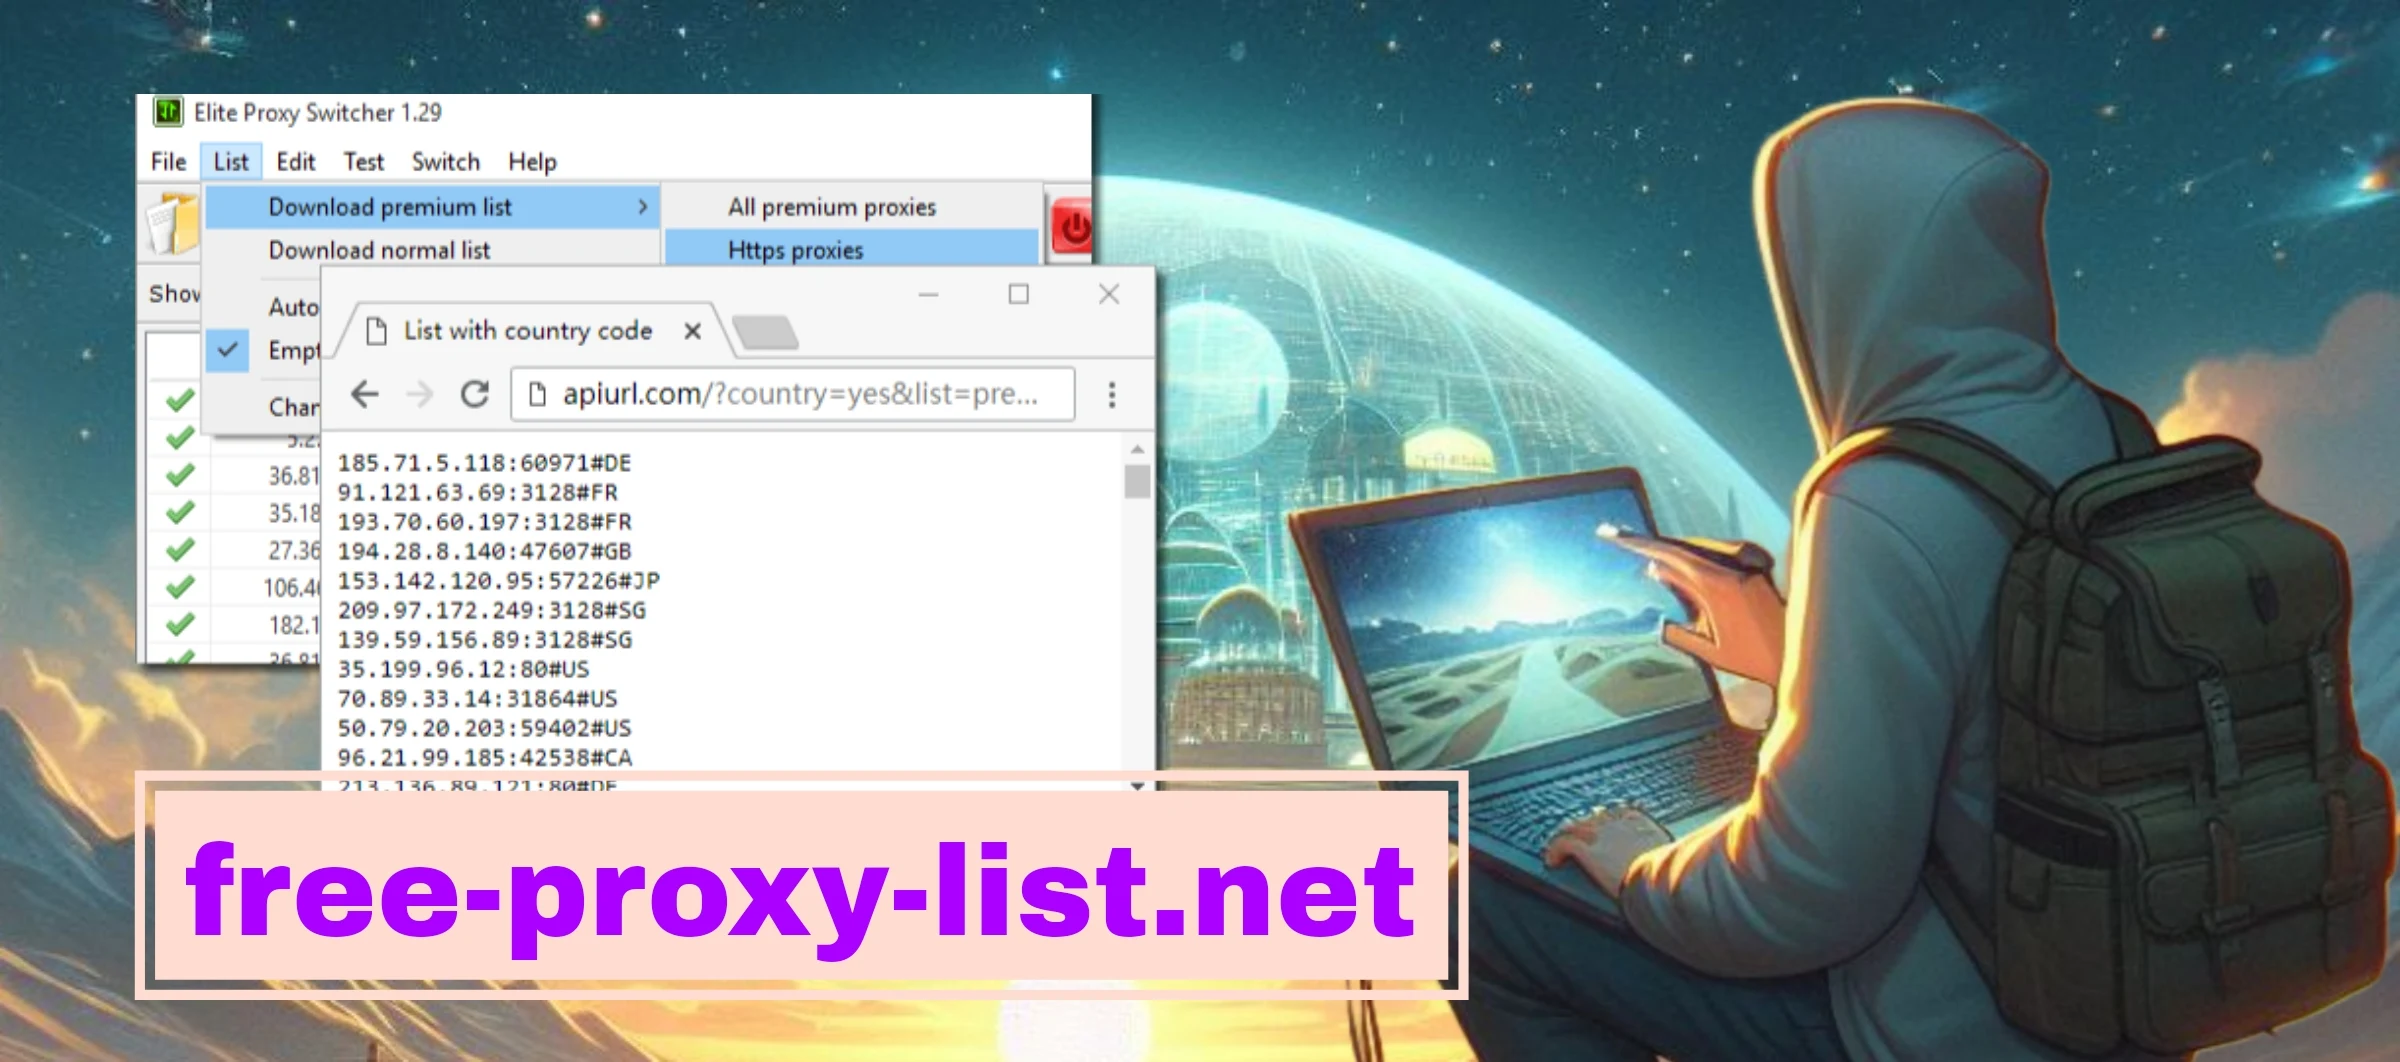 Use the Proxy-List website to get daily renewed proxy addresses